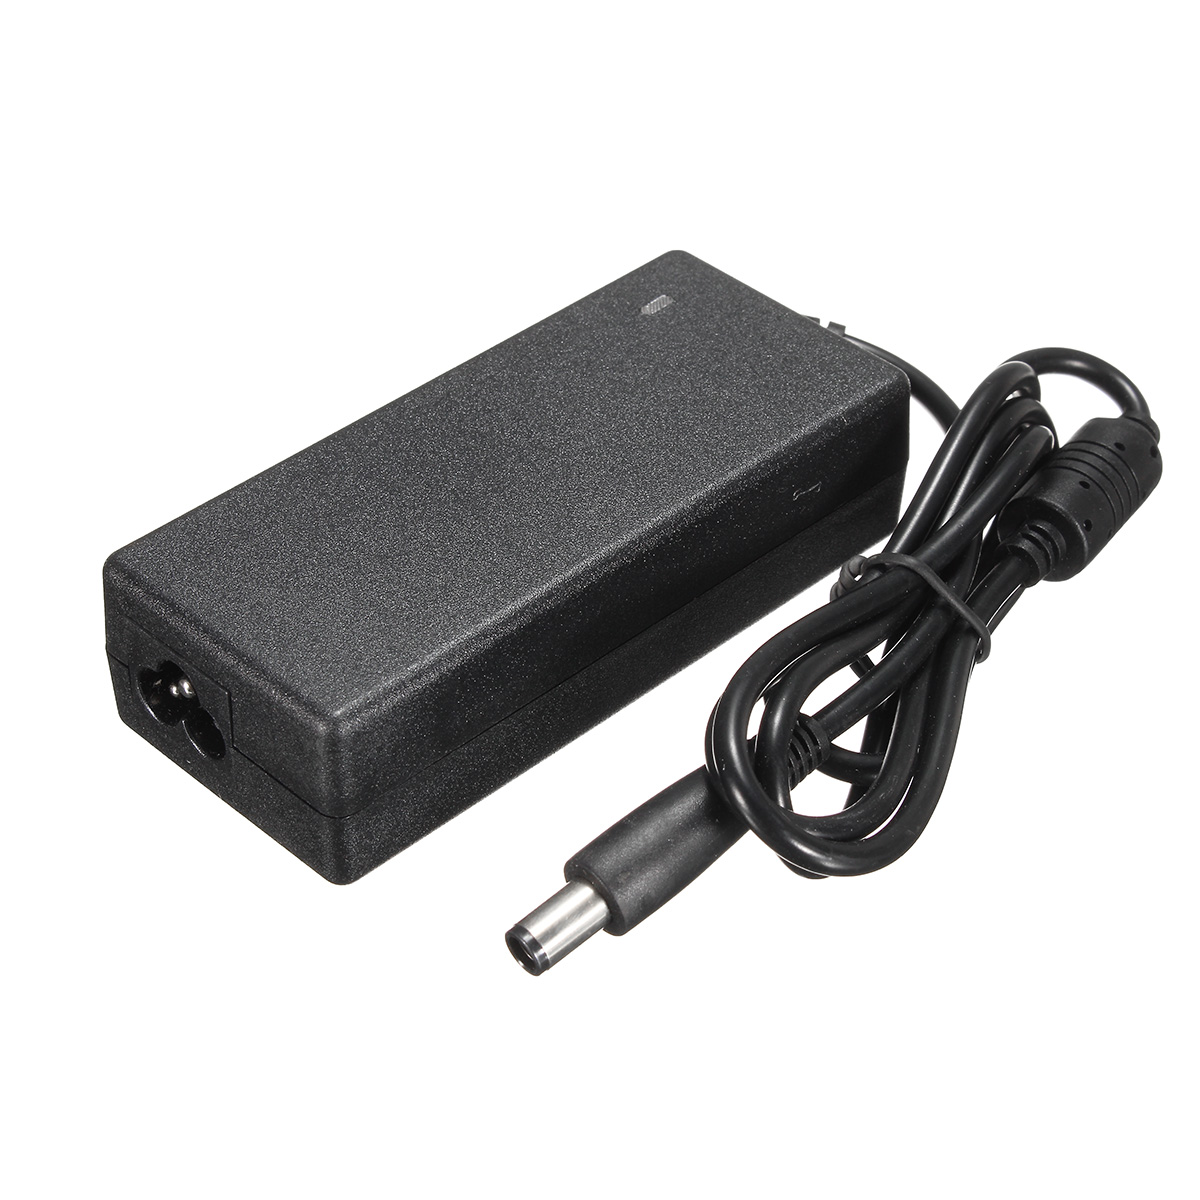 65W-Replacement-AC-Adapter-For-HP-Pavilion-G4-G5-G6-G7-Notebook-1201182-2